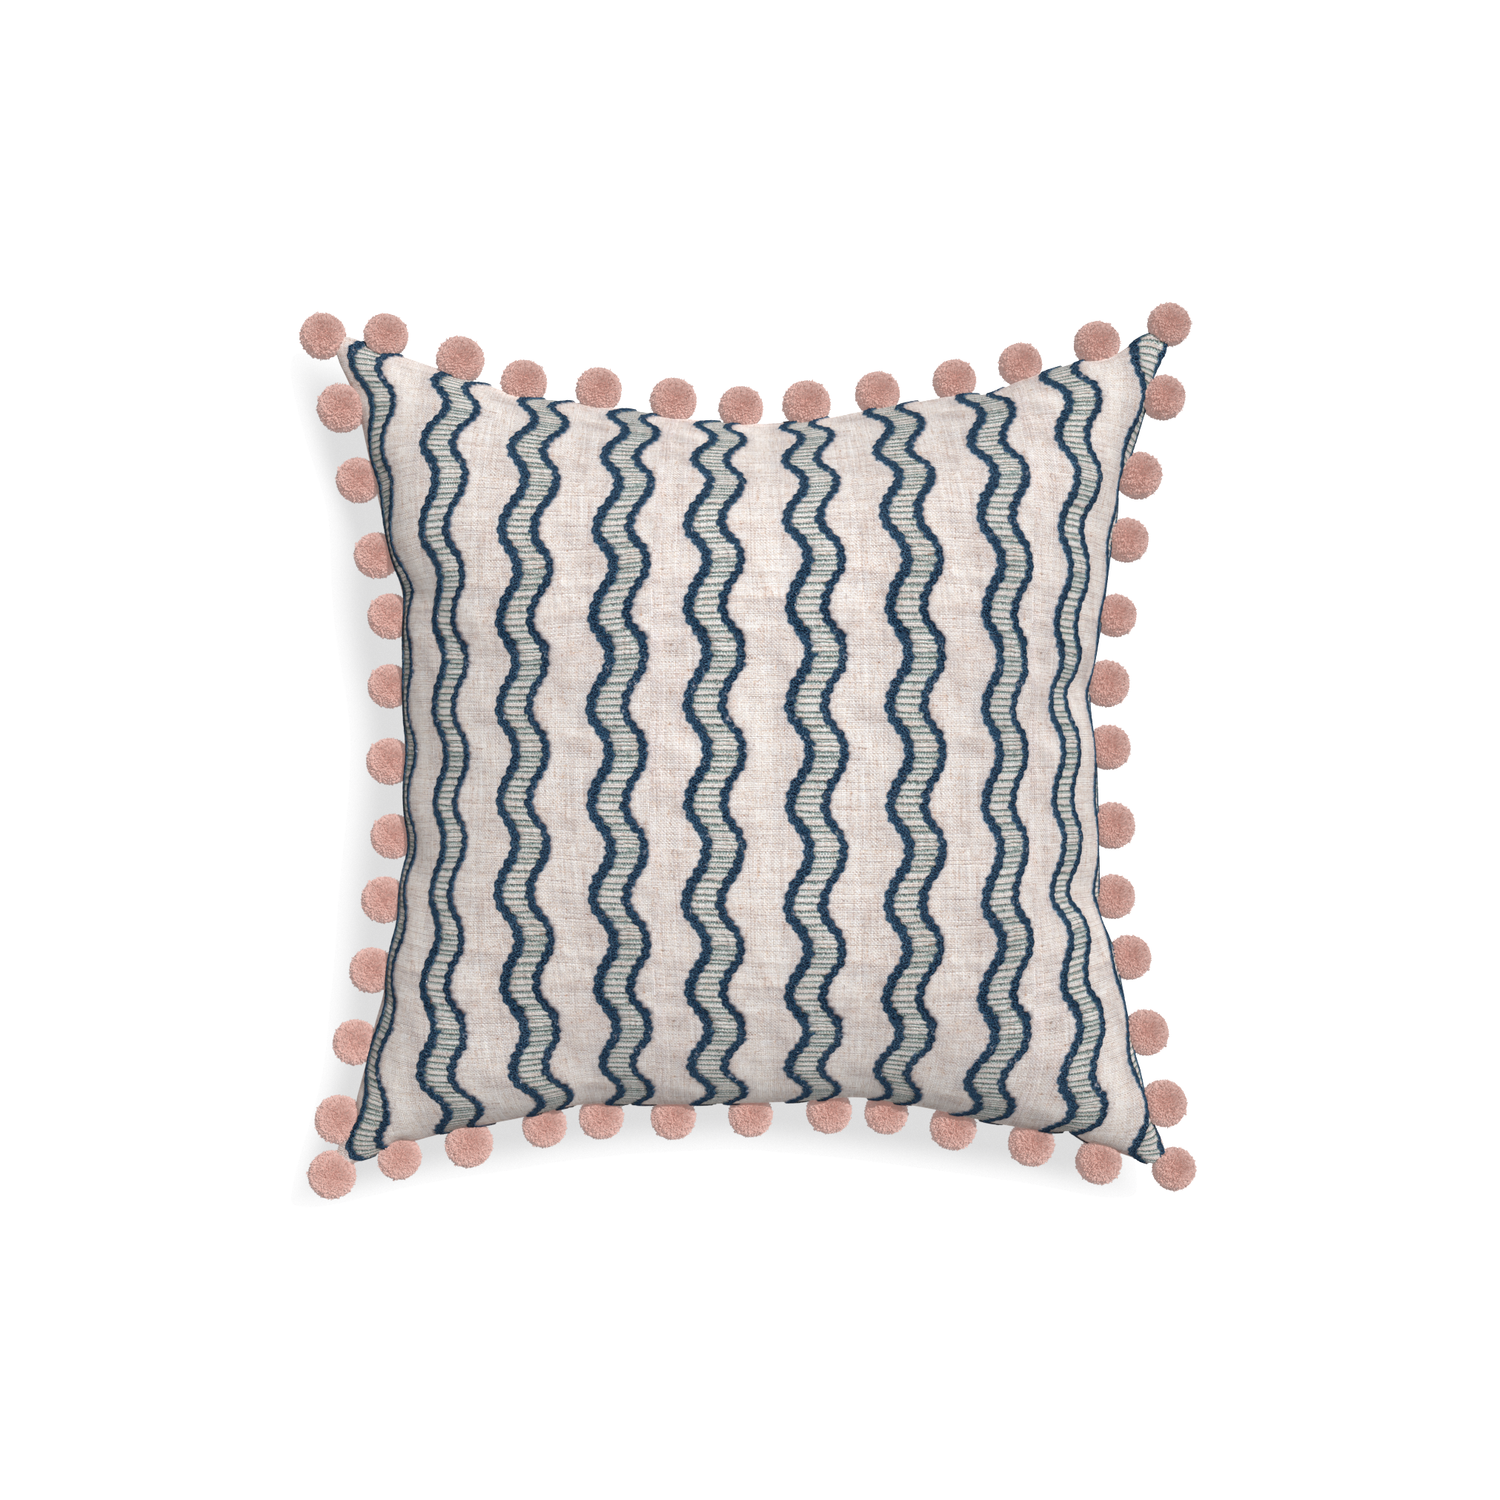 18-square beatrice custom embroidered wavepillow with rose pom pom on white background